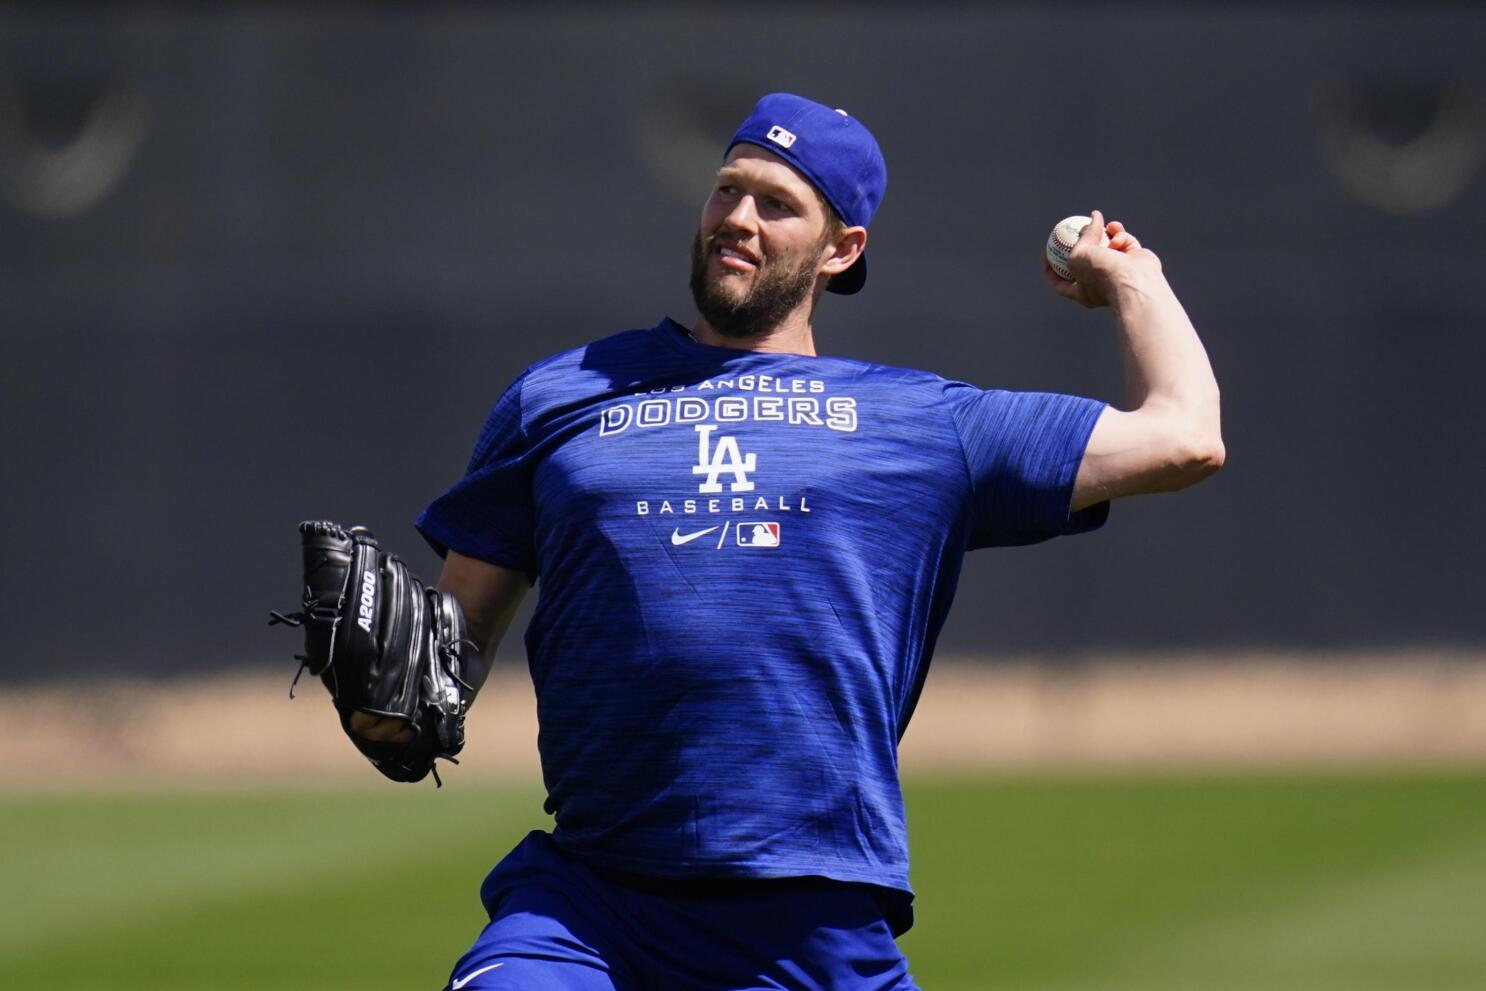 Kershaw can earn up to $22M as part of 2022 Dodgers' deal